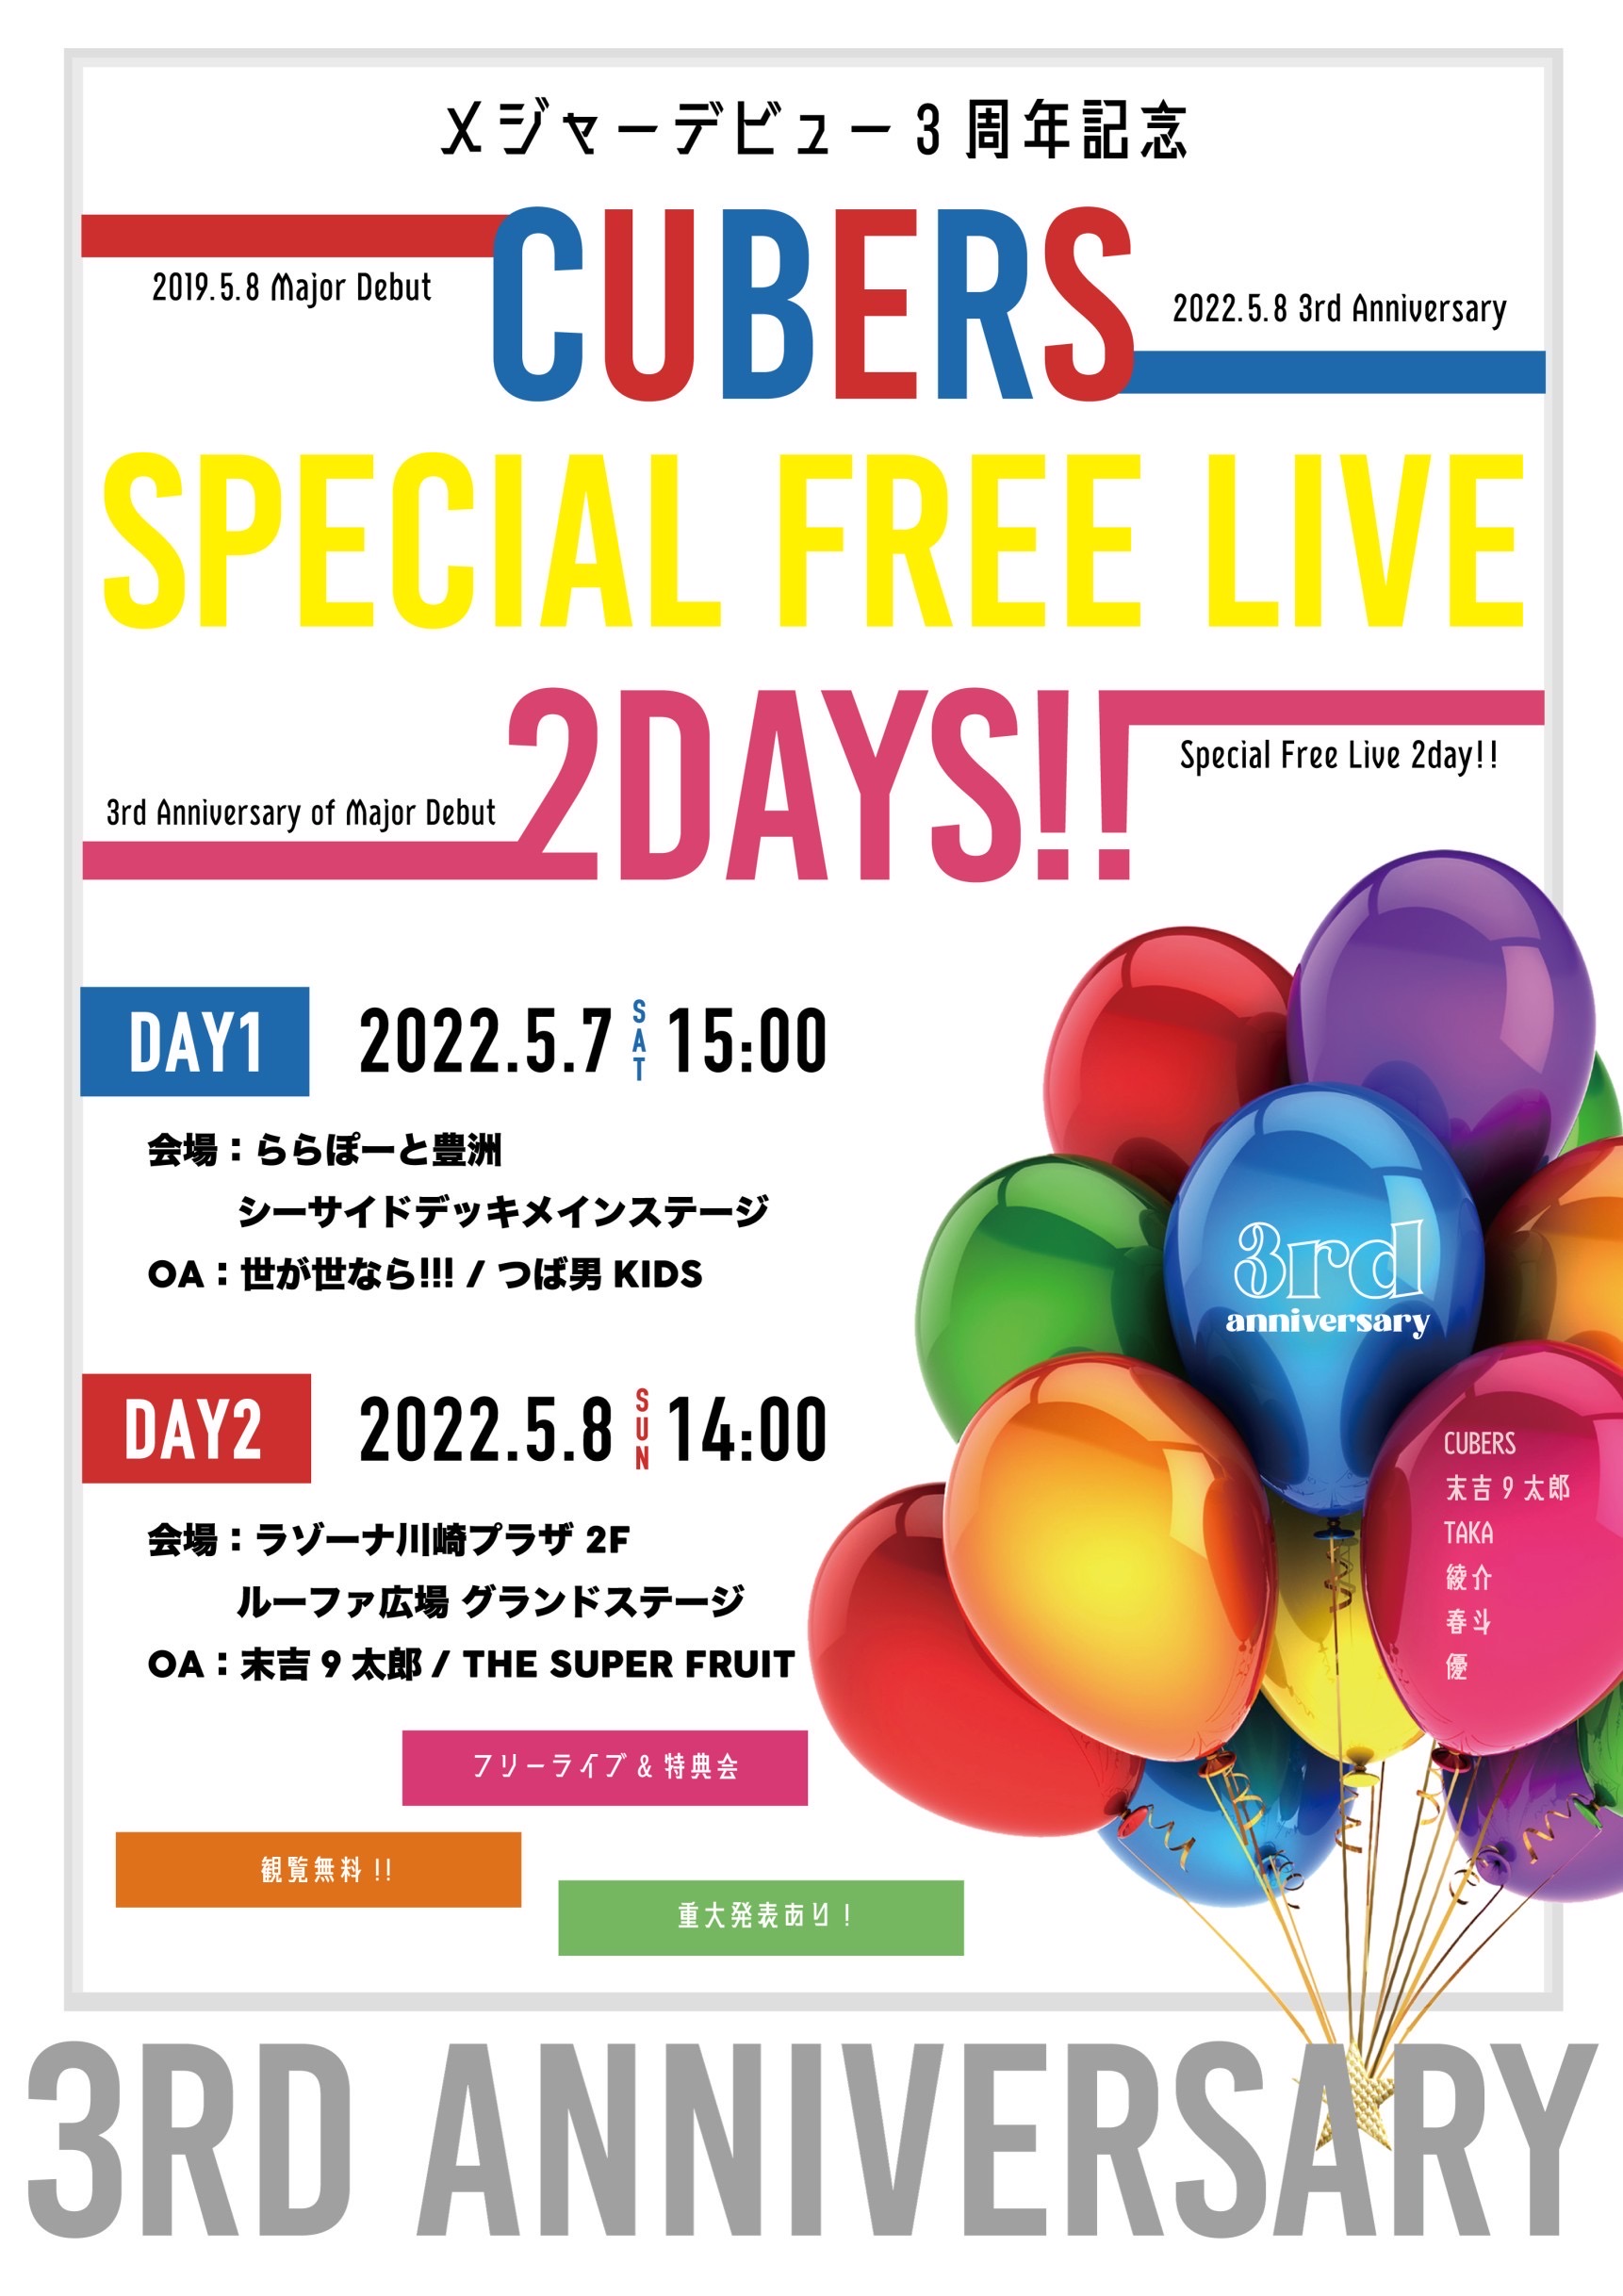 【NEWS】5月7日(土)・5月8日(日)に開催される「メジャーデビュー３周年記念 CUBERS SPECIAL FREE LIVE 2DAYS!!」DAY2への出演が決定！